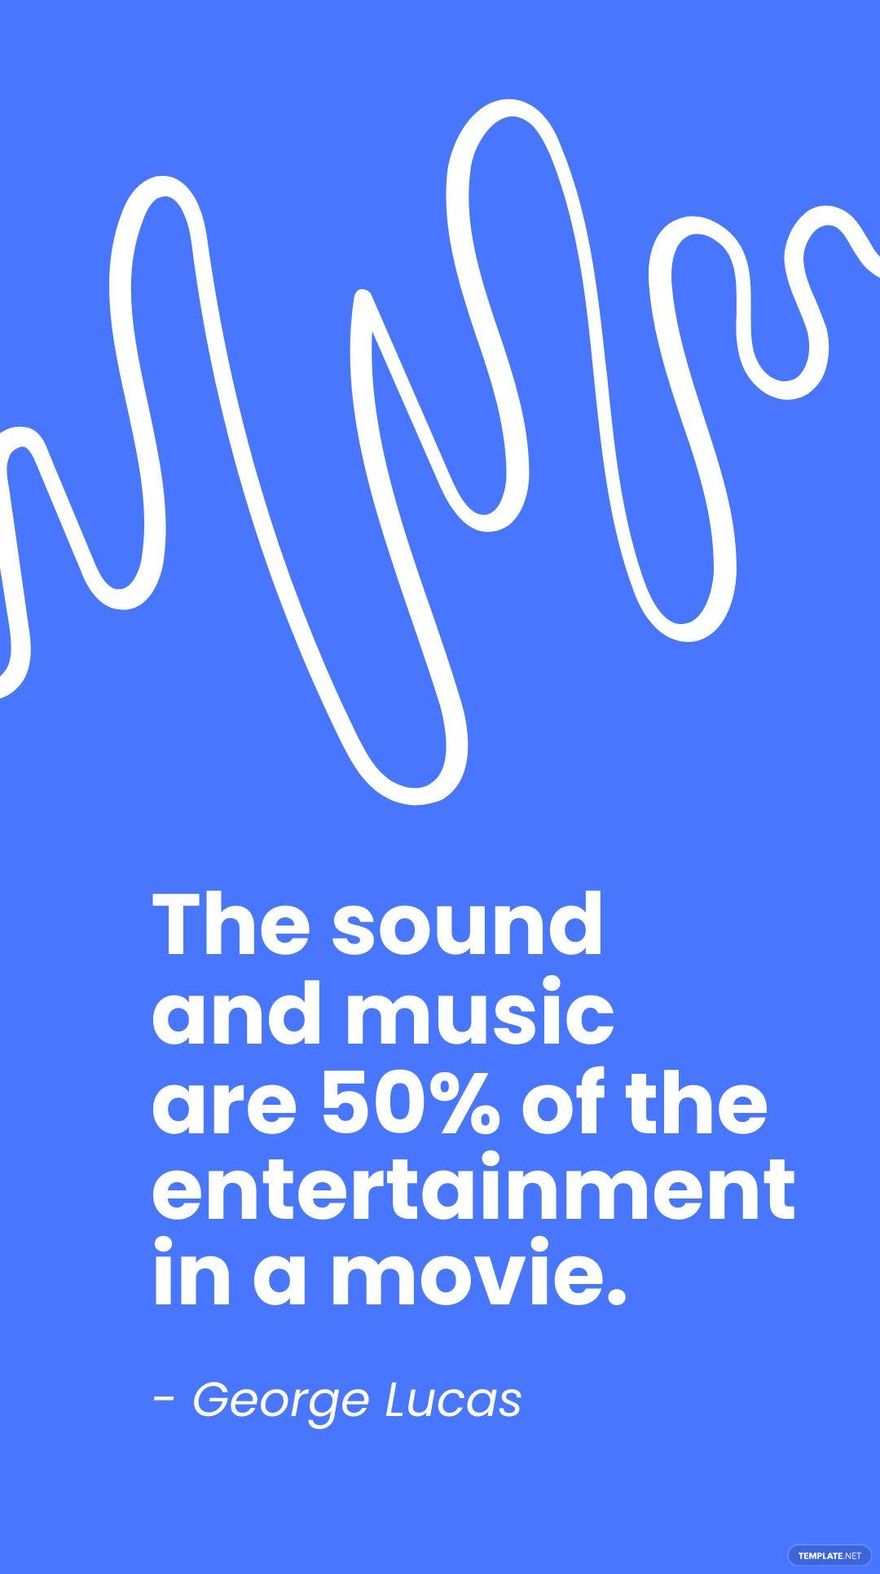 George Lucas - The sound and music are 50% of the entertainment in a movie.